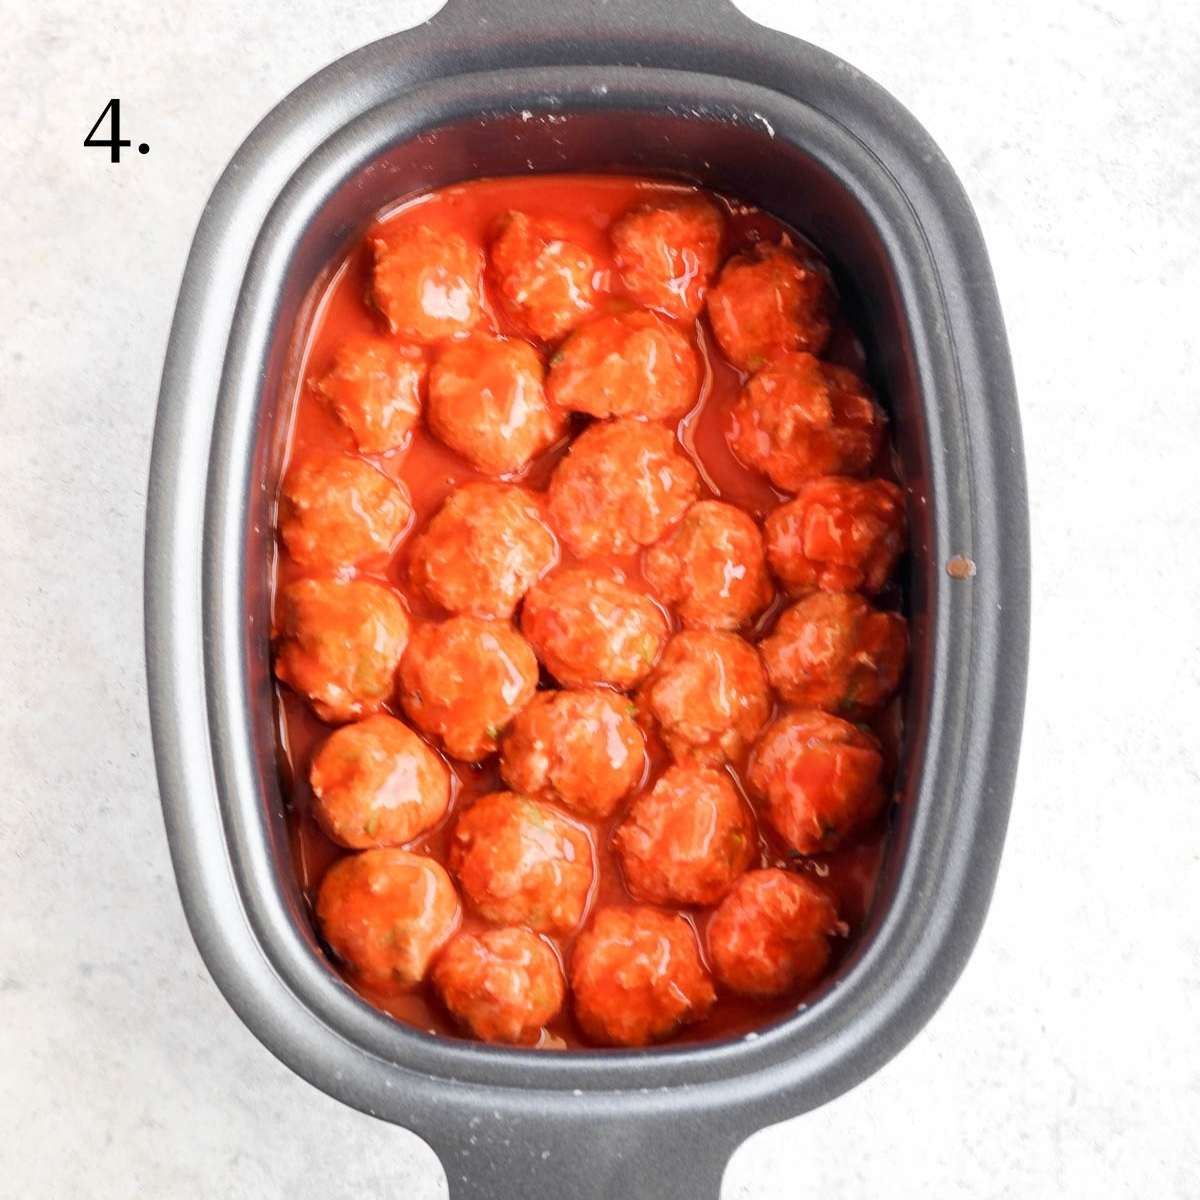 A crockpot filled with uncooked turkey meatballs covered in hot sauce.